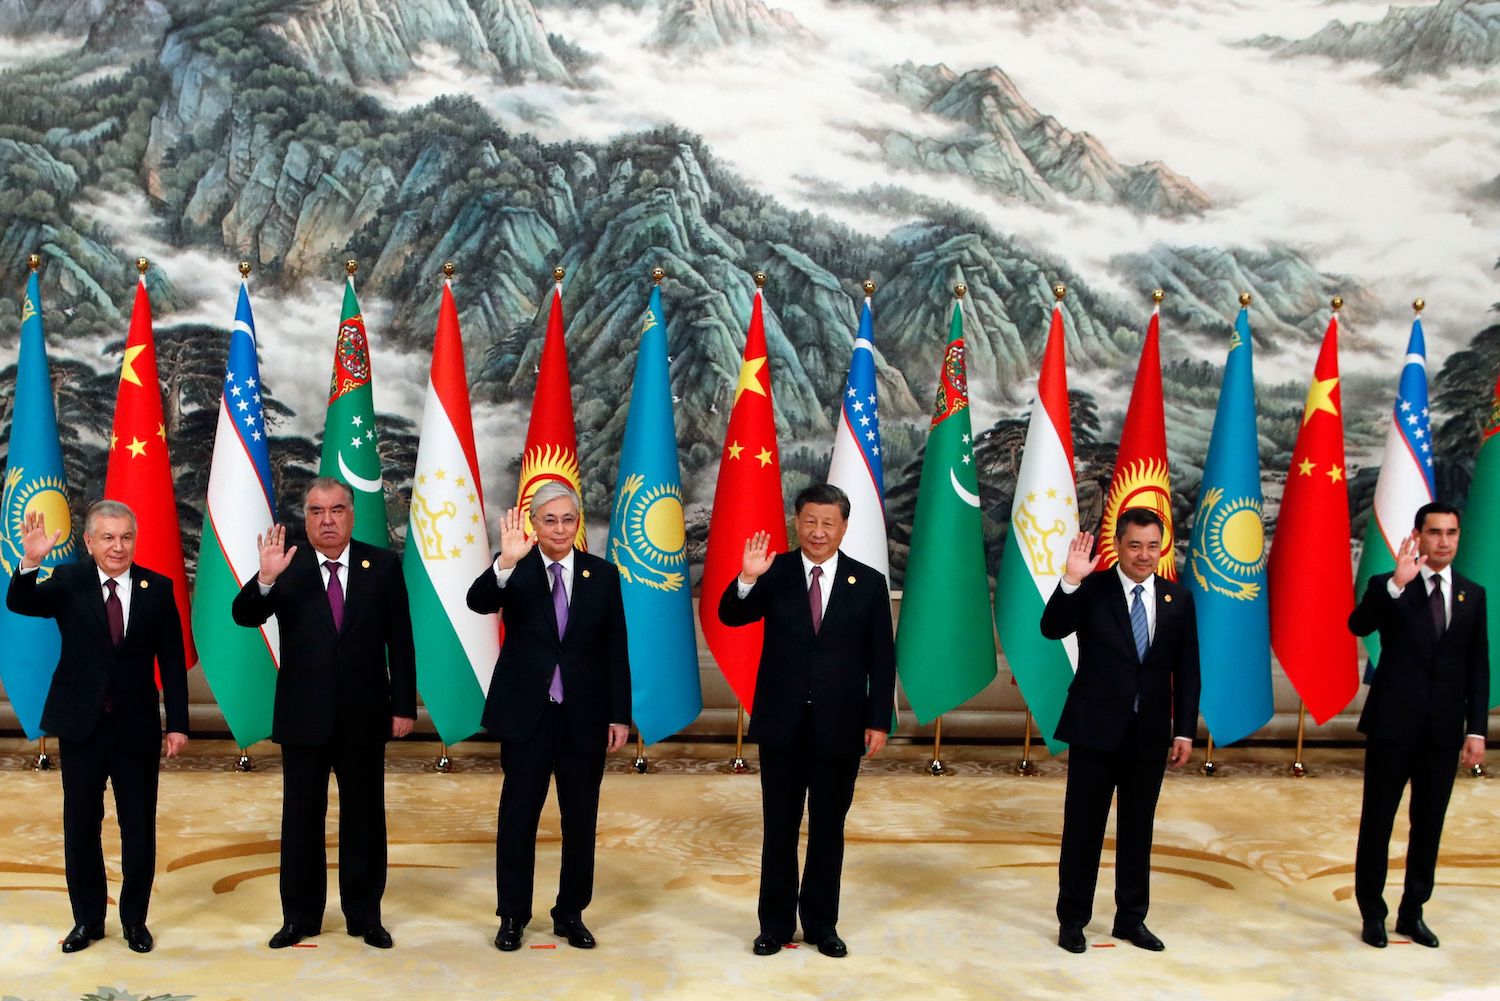 xi-xian-central-asia-summit-GettyImages-1256032075.jpg